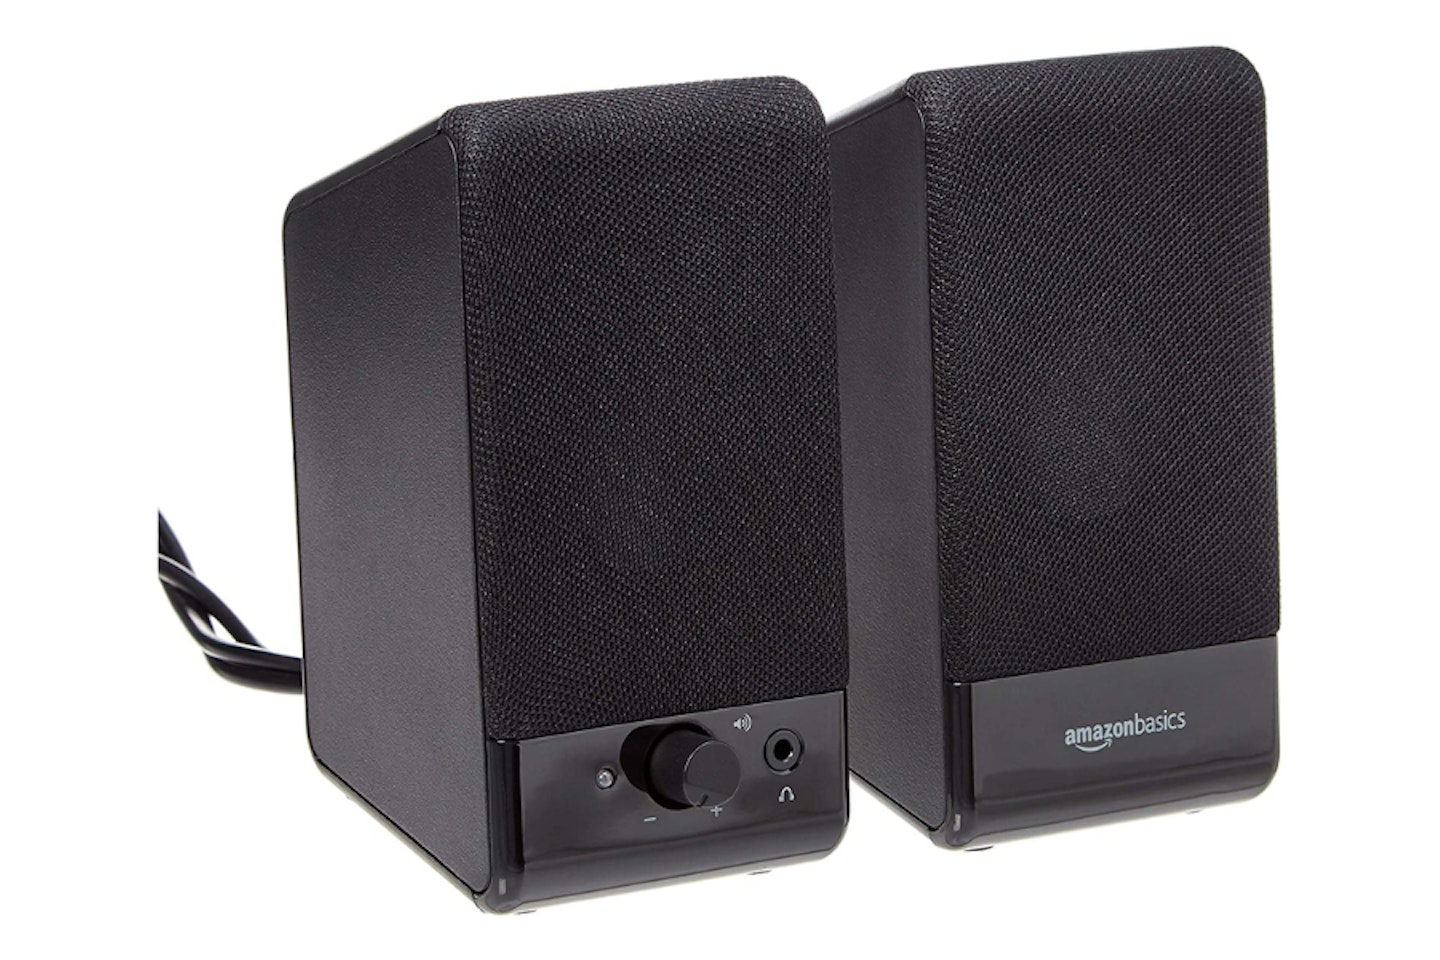 Amazon Basics Computer Speakers - one of the best laptop speakers in 2023